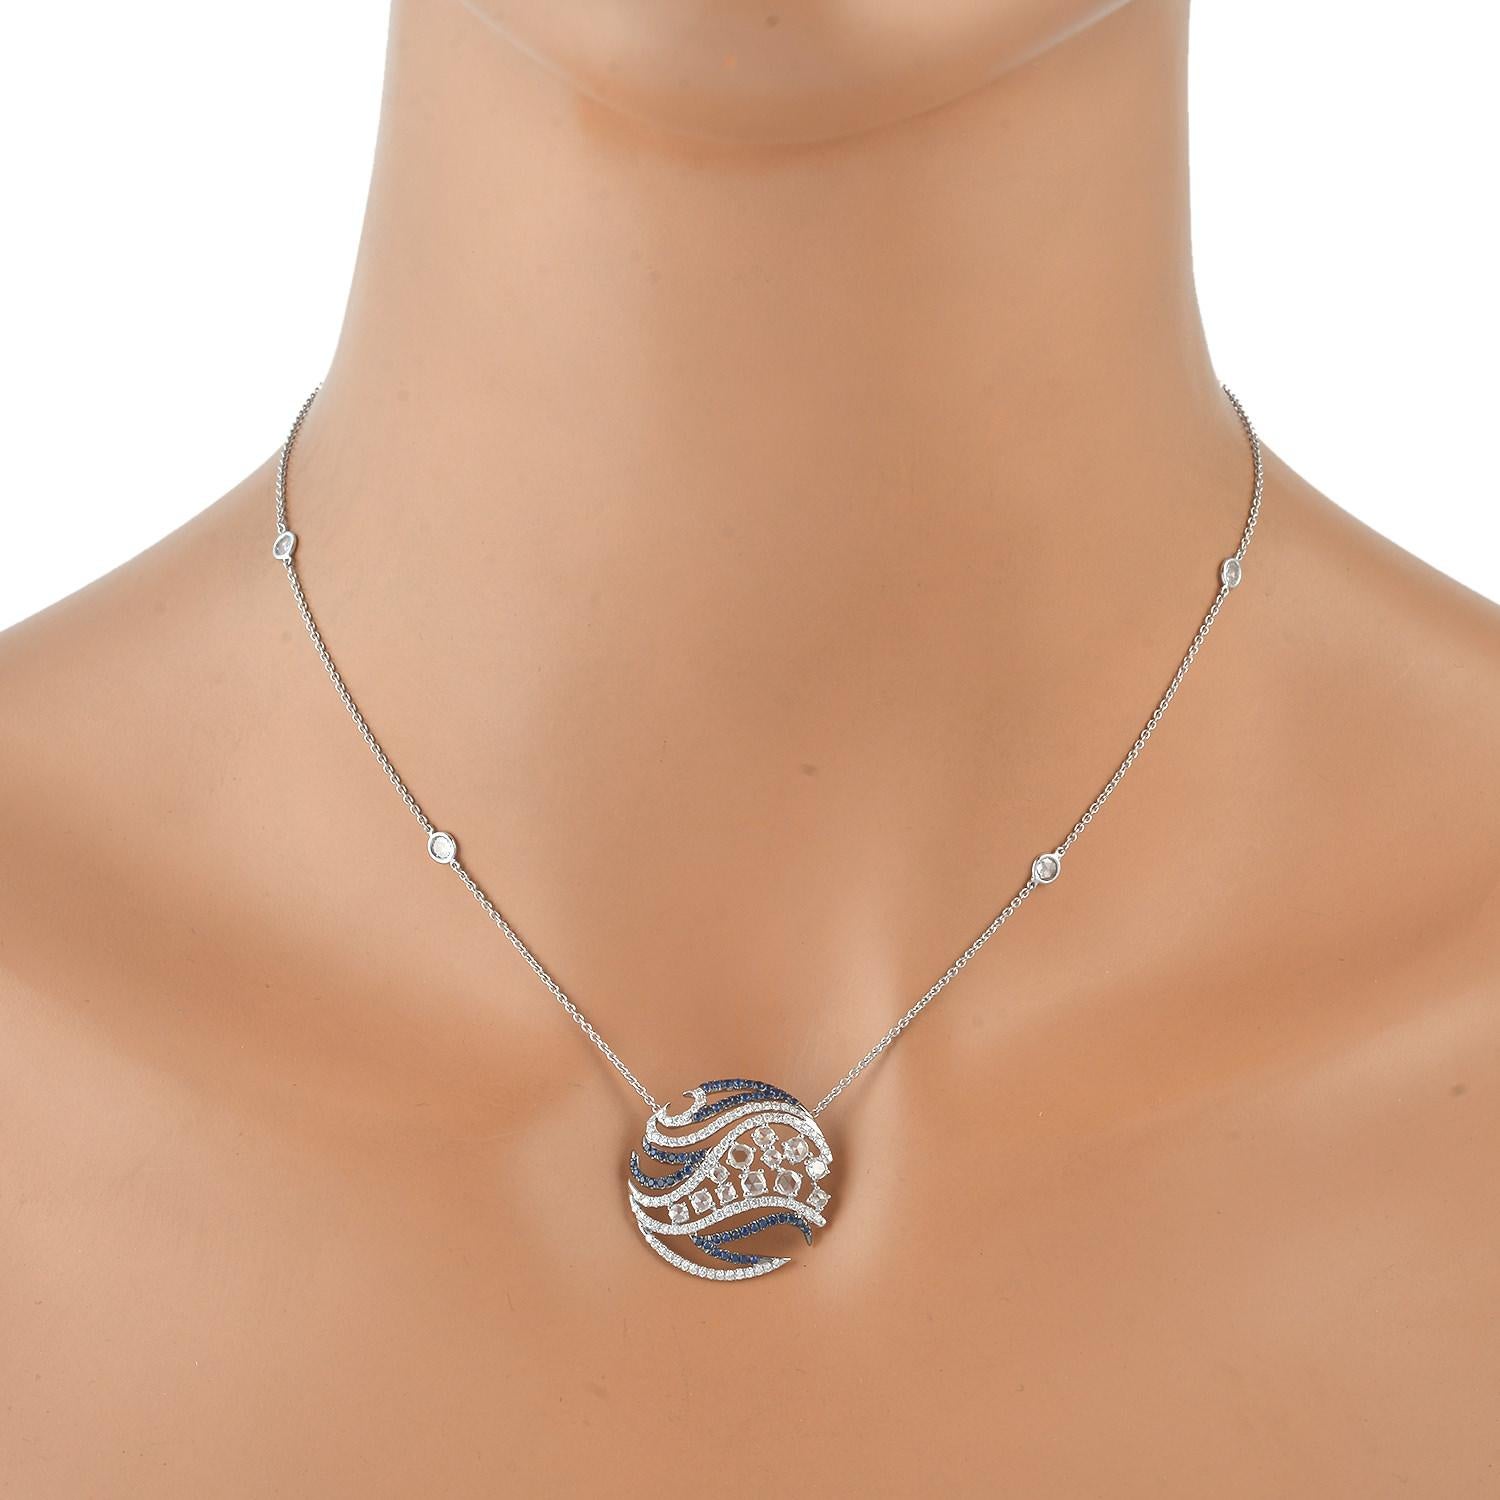 This sweet Diamond and Blue sapphire pendant necklace in 18K white gold is a beautiful gift to yourself or a loved one.

18K: 5.543gms
Diamond: 1.088cts
SAPPHIRE: 0.357cts